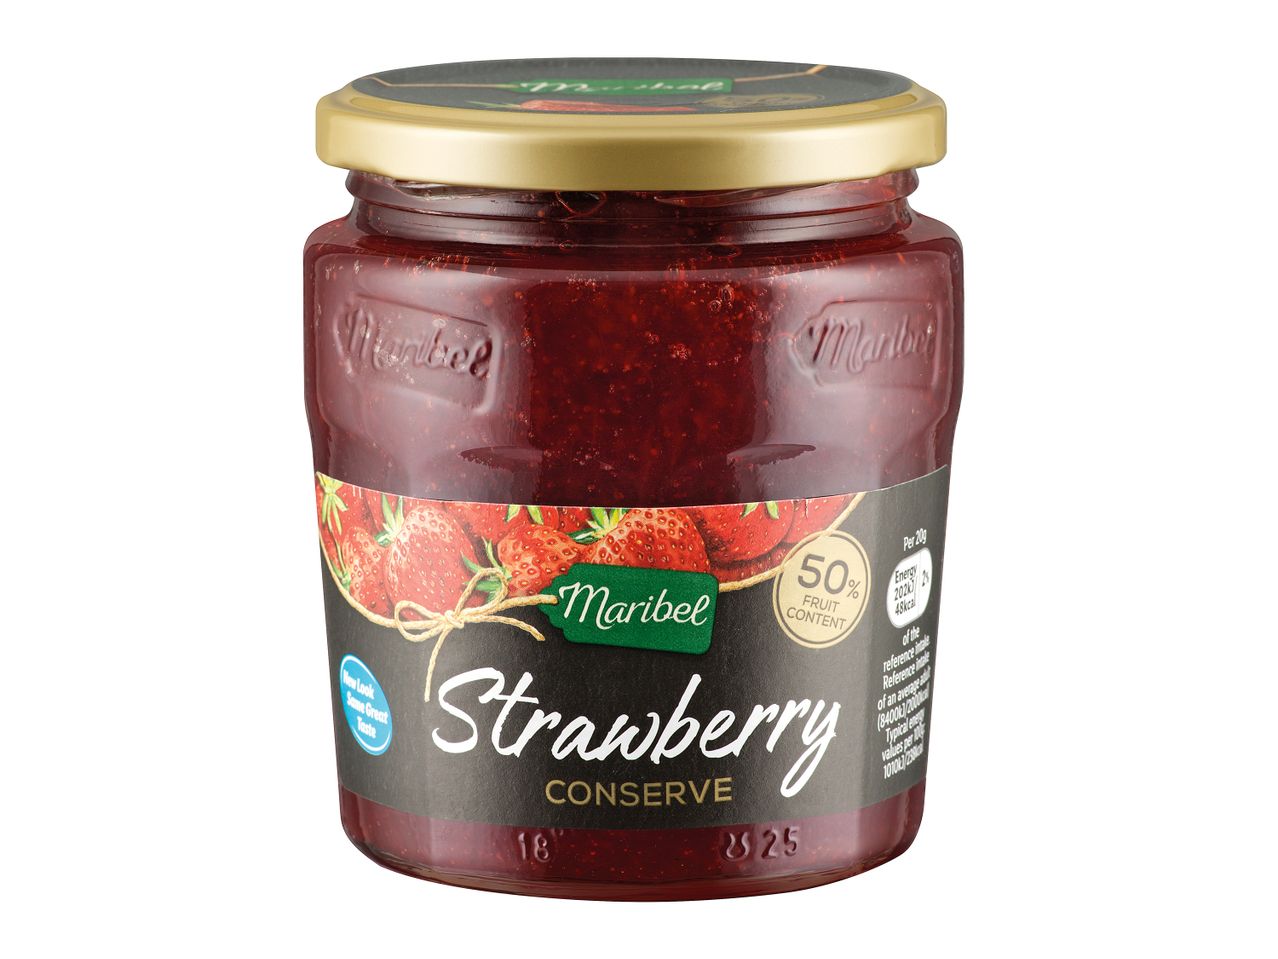 Go to full screen view: Maribel Strawberry Conserve - Image 1